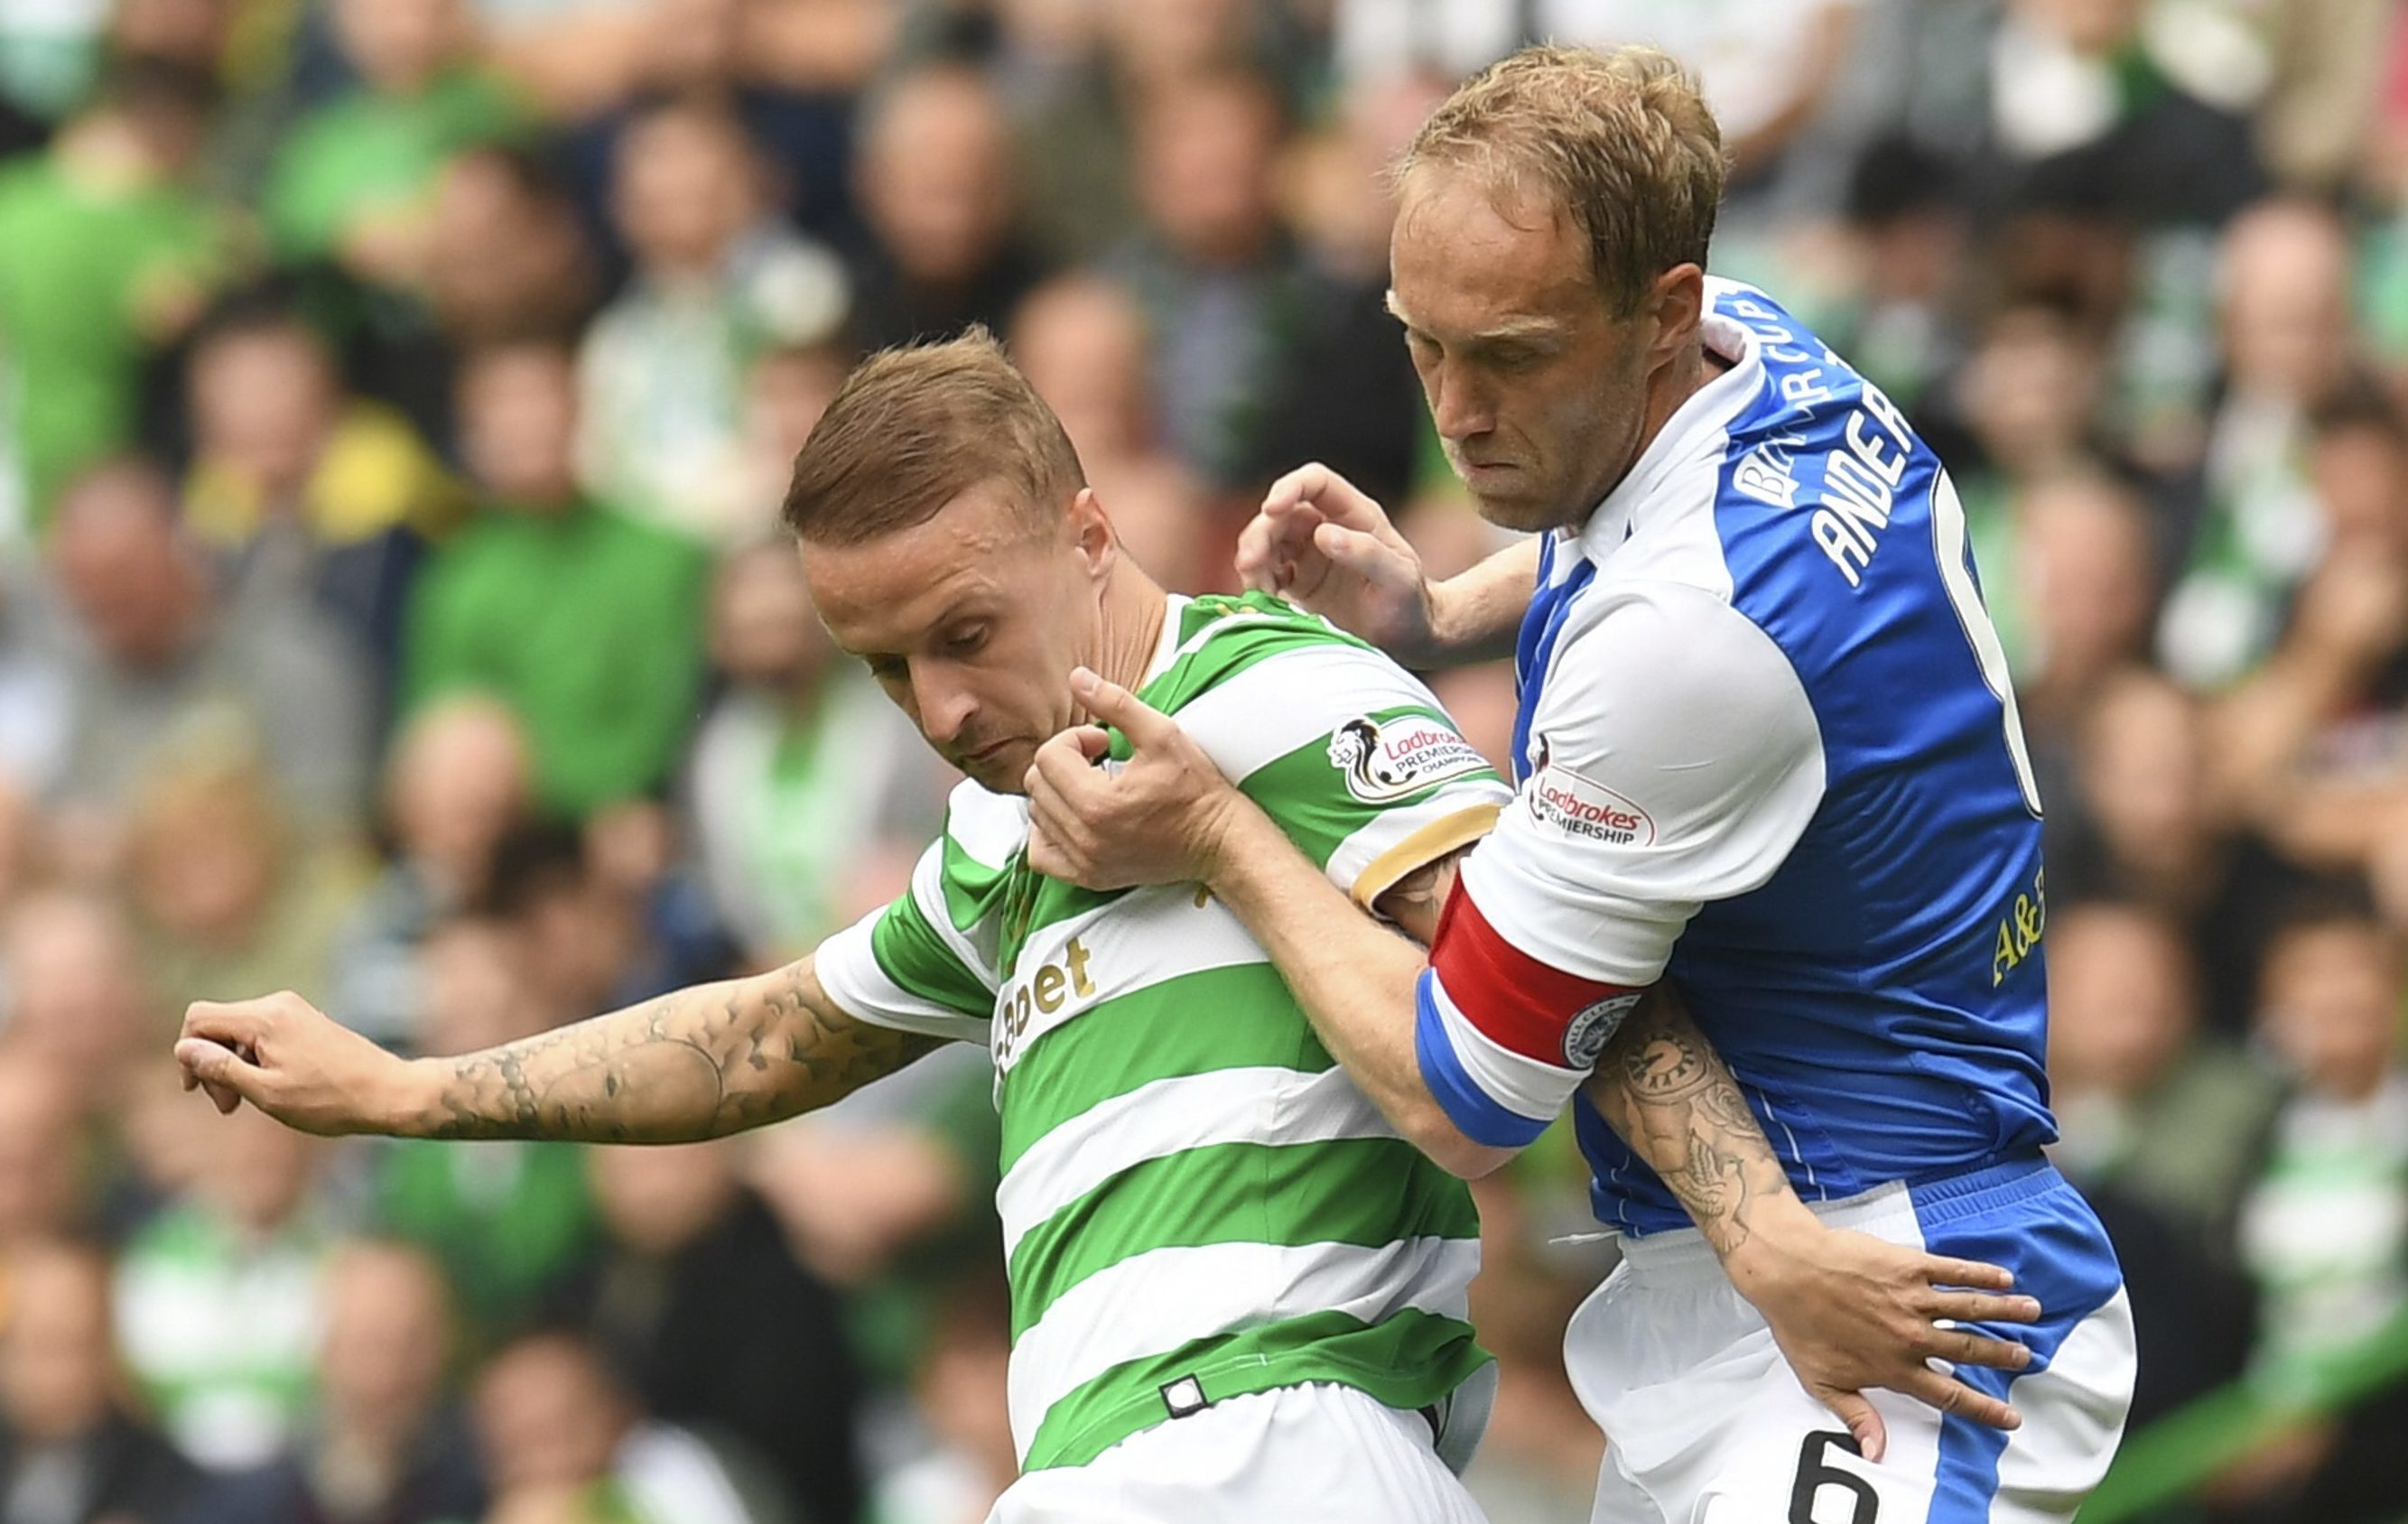 Steven Anderson in action against Celtic striker Leigh Griffiths.